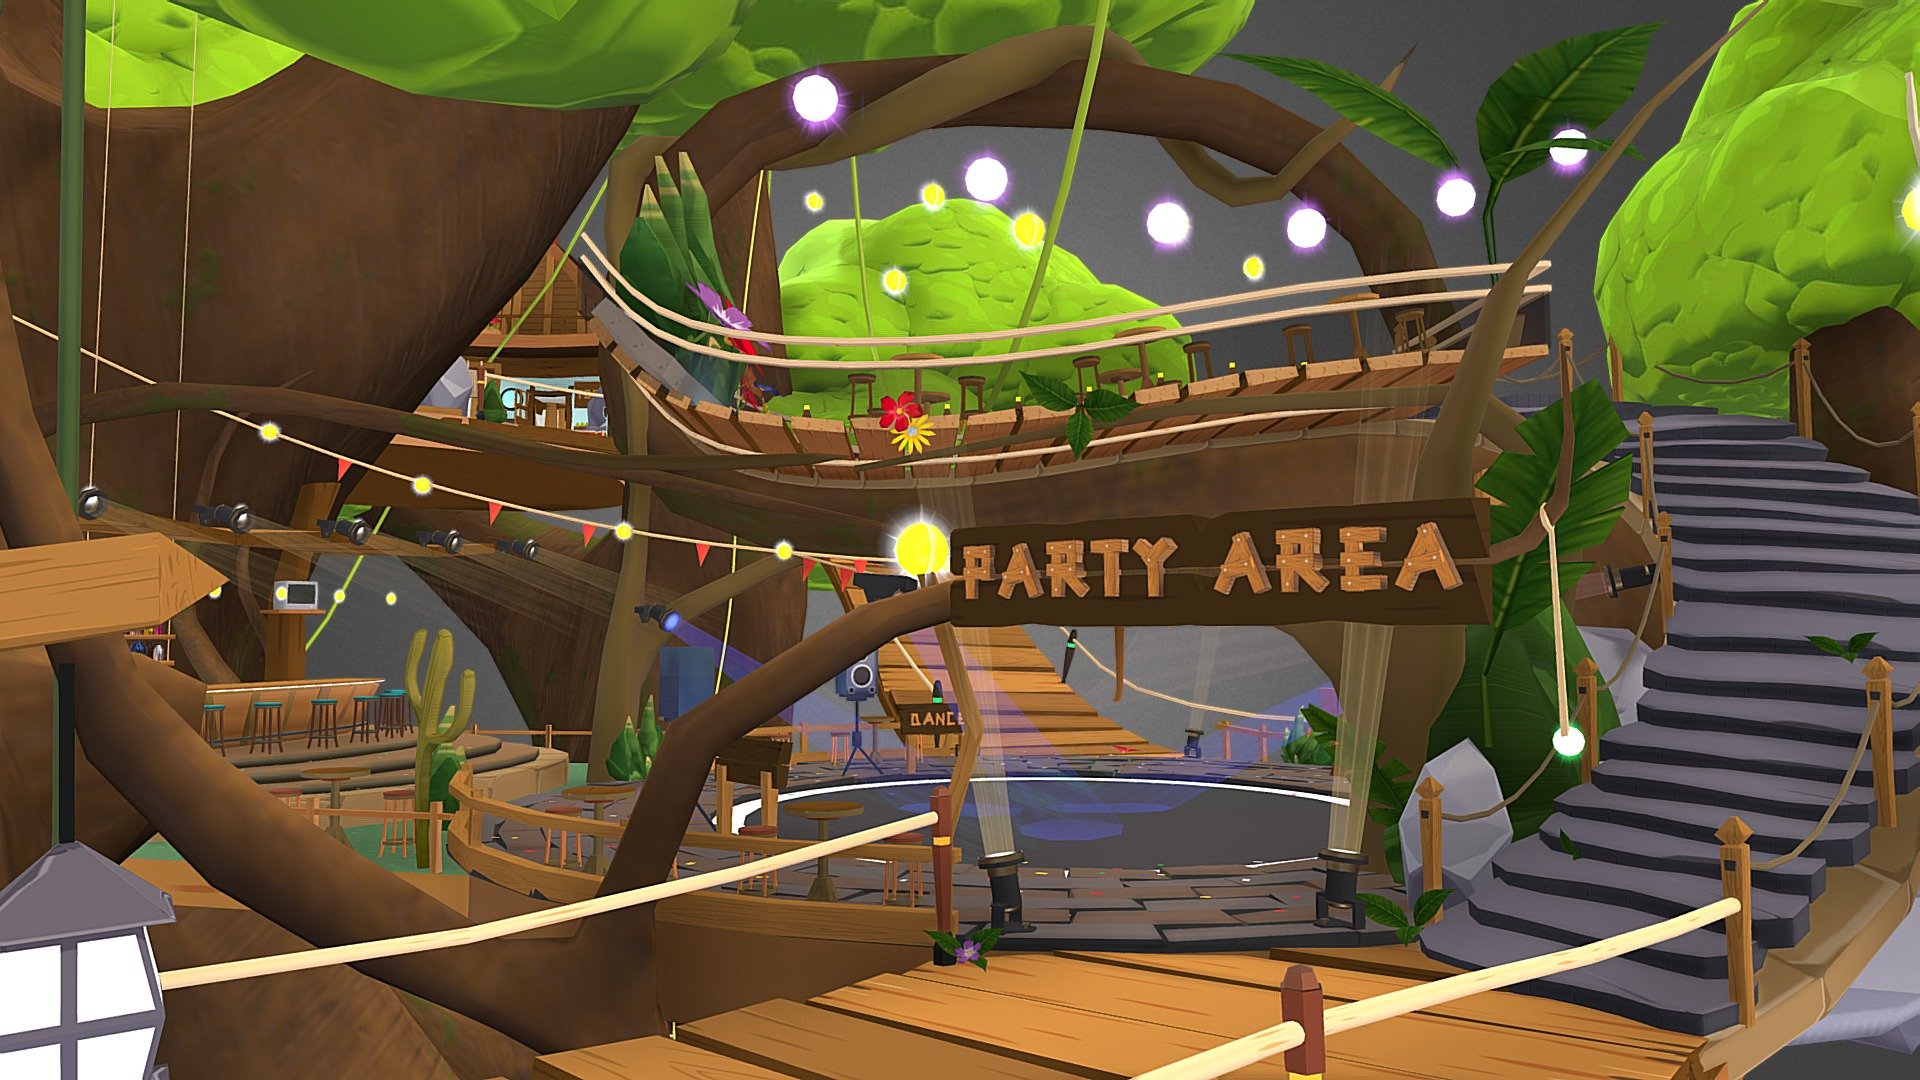 Welcome to the Party Area, your first stop during the End of Year Quest in Decentraland. 

Your first task is to find this area and dance your heart out to receive  your first gift: the Patch Pants. 

As you go through the rest of the quest you'll find the Wishing Well, Memory Lane and the Digital Nomad's Oasis.

Play in Decentraland at coordinates: 148, -100

Created by FGR3D, MaHa, Inihility and KJ Walker of LowPolyModels 3d model